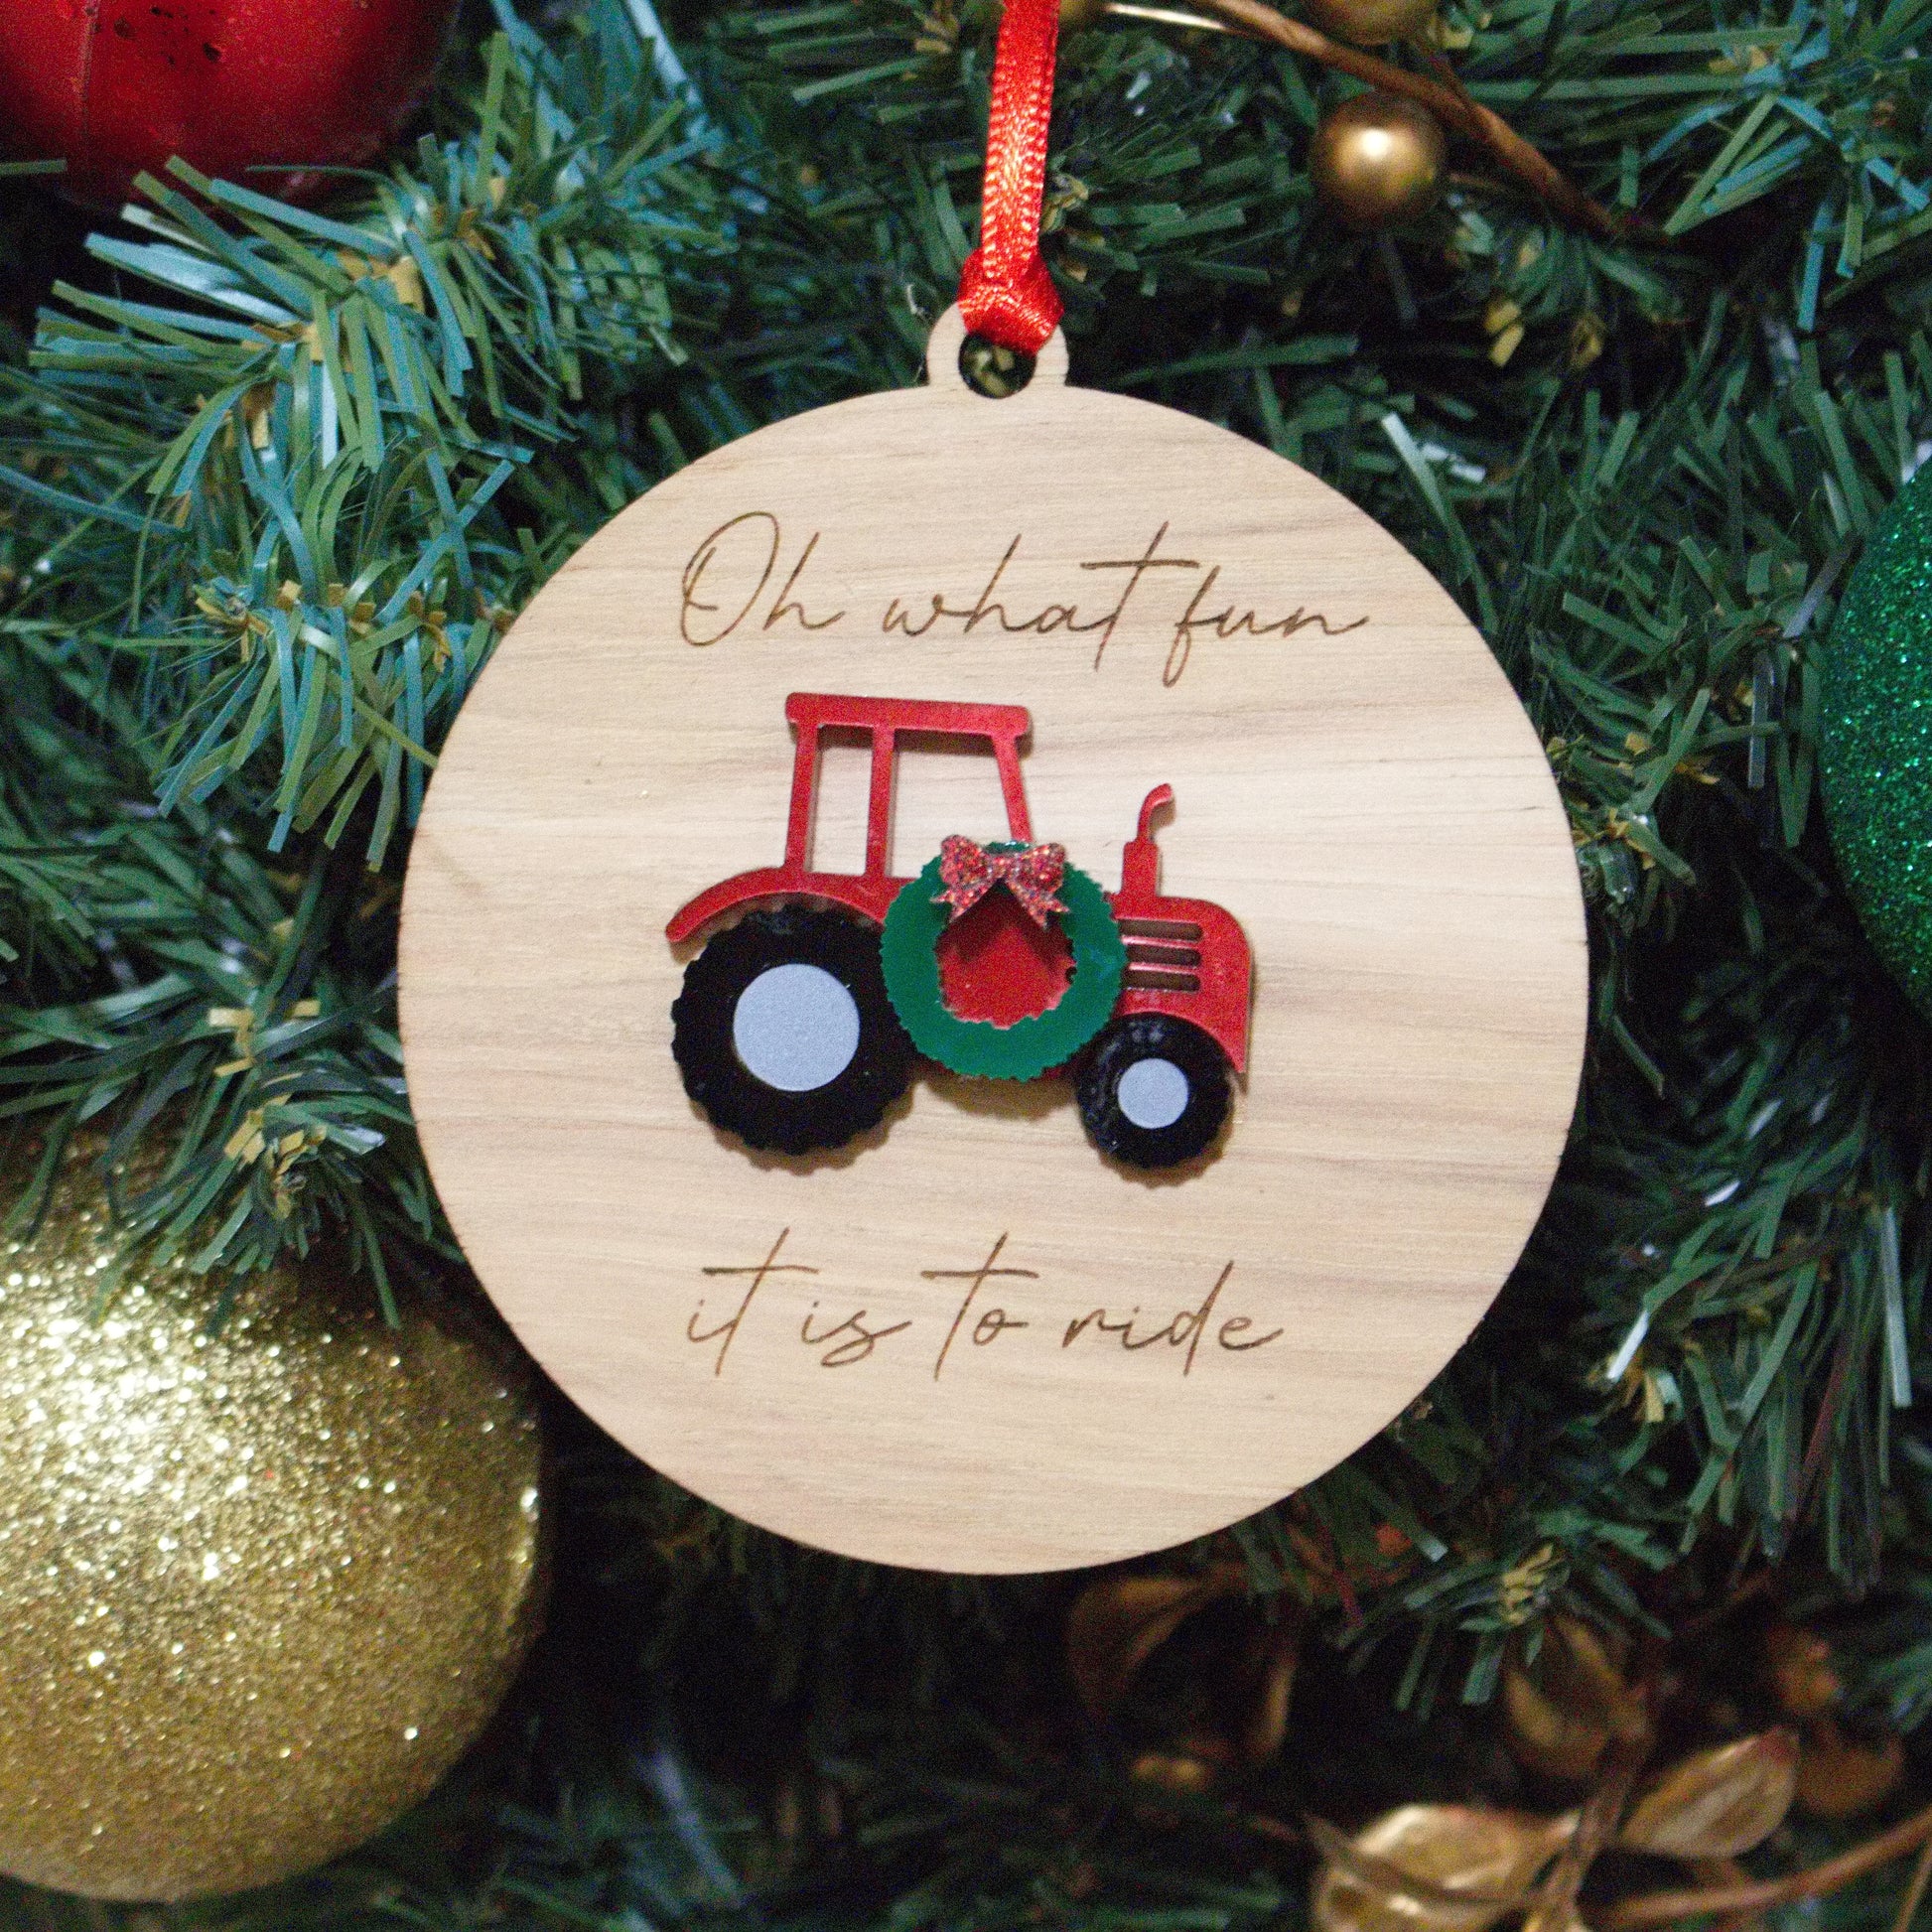 Oh What Fun It Is To Ride Christmas ornament with a tractor and a wreath hanging on it.